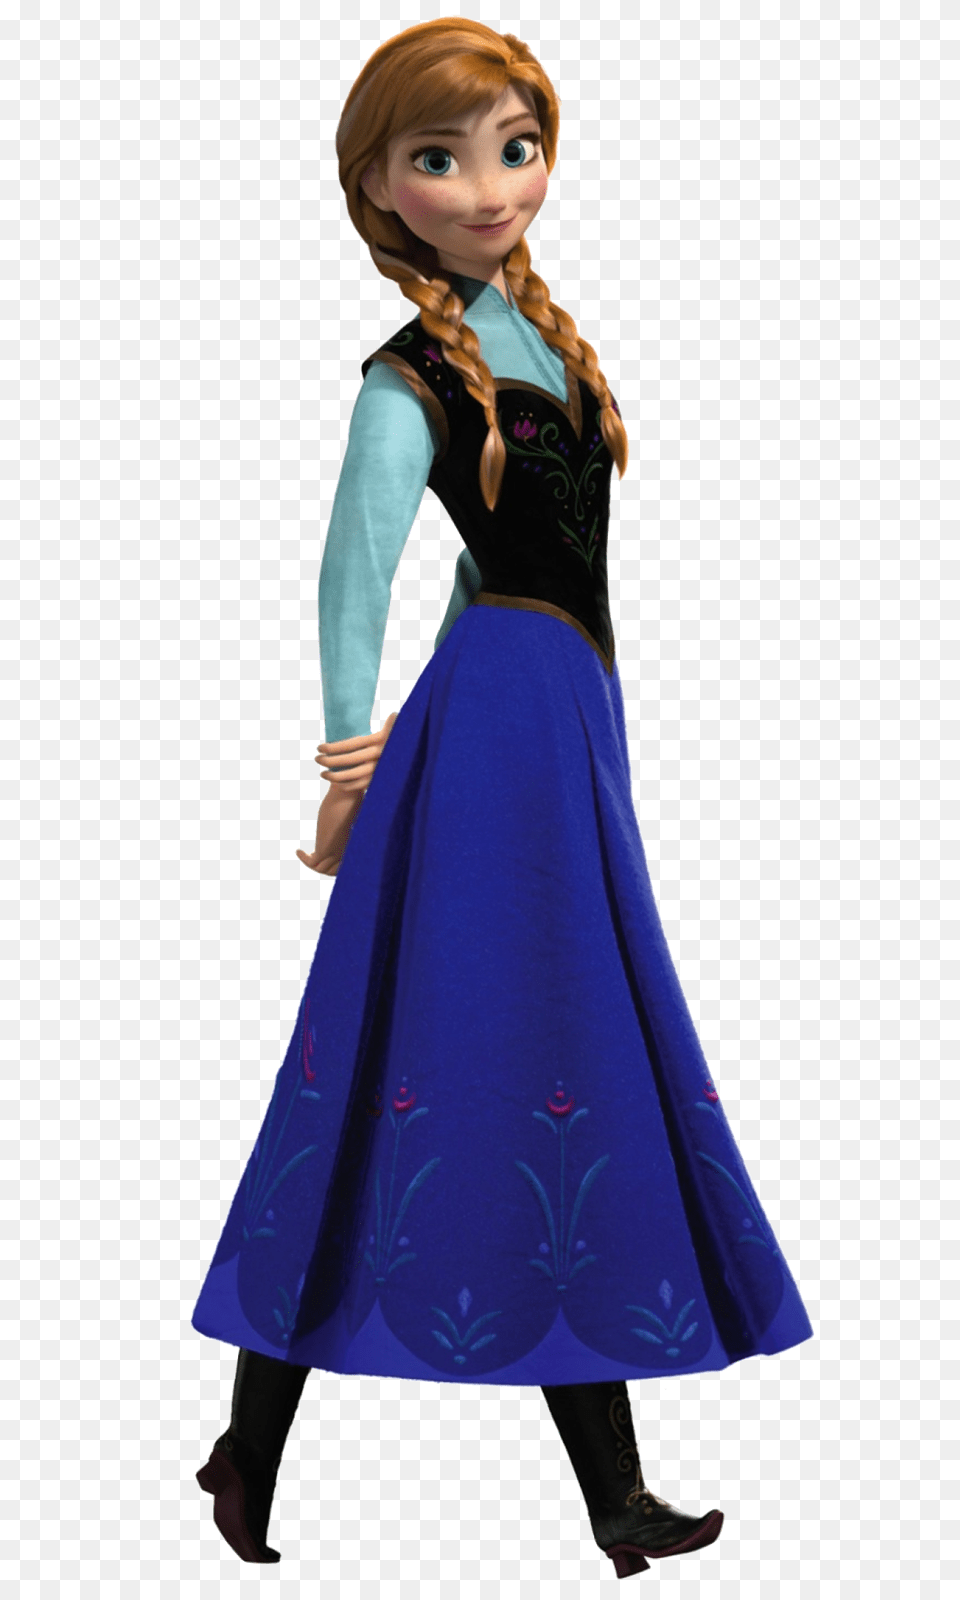 Frozen Images Clipart Frozen Anna, Formal Wear, Clothing, Dress, Female Png Image